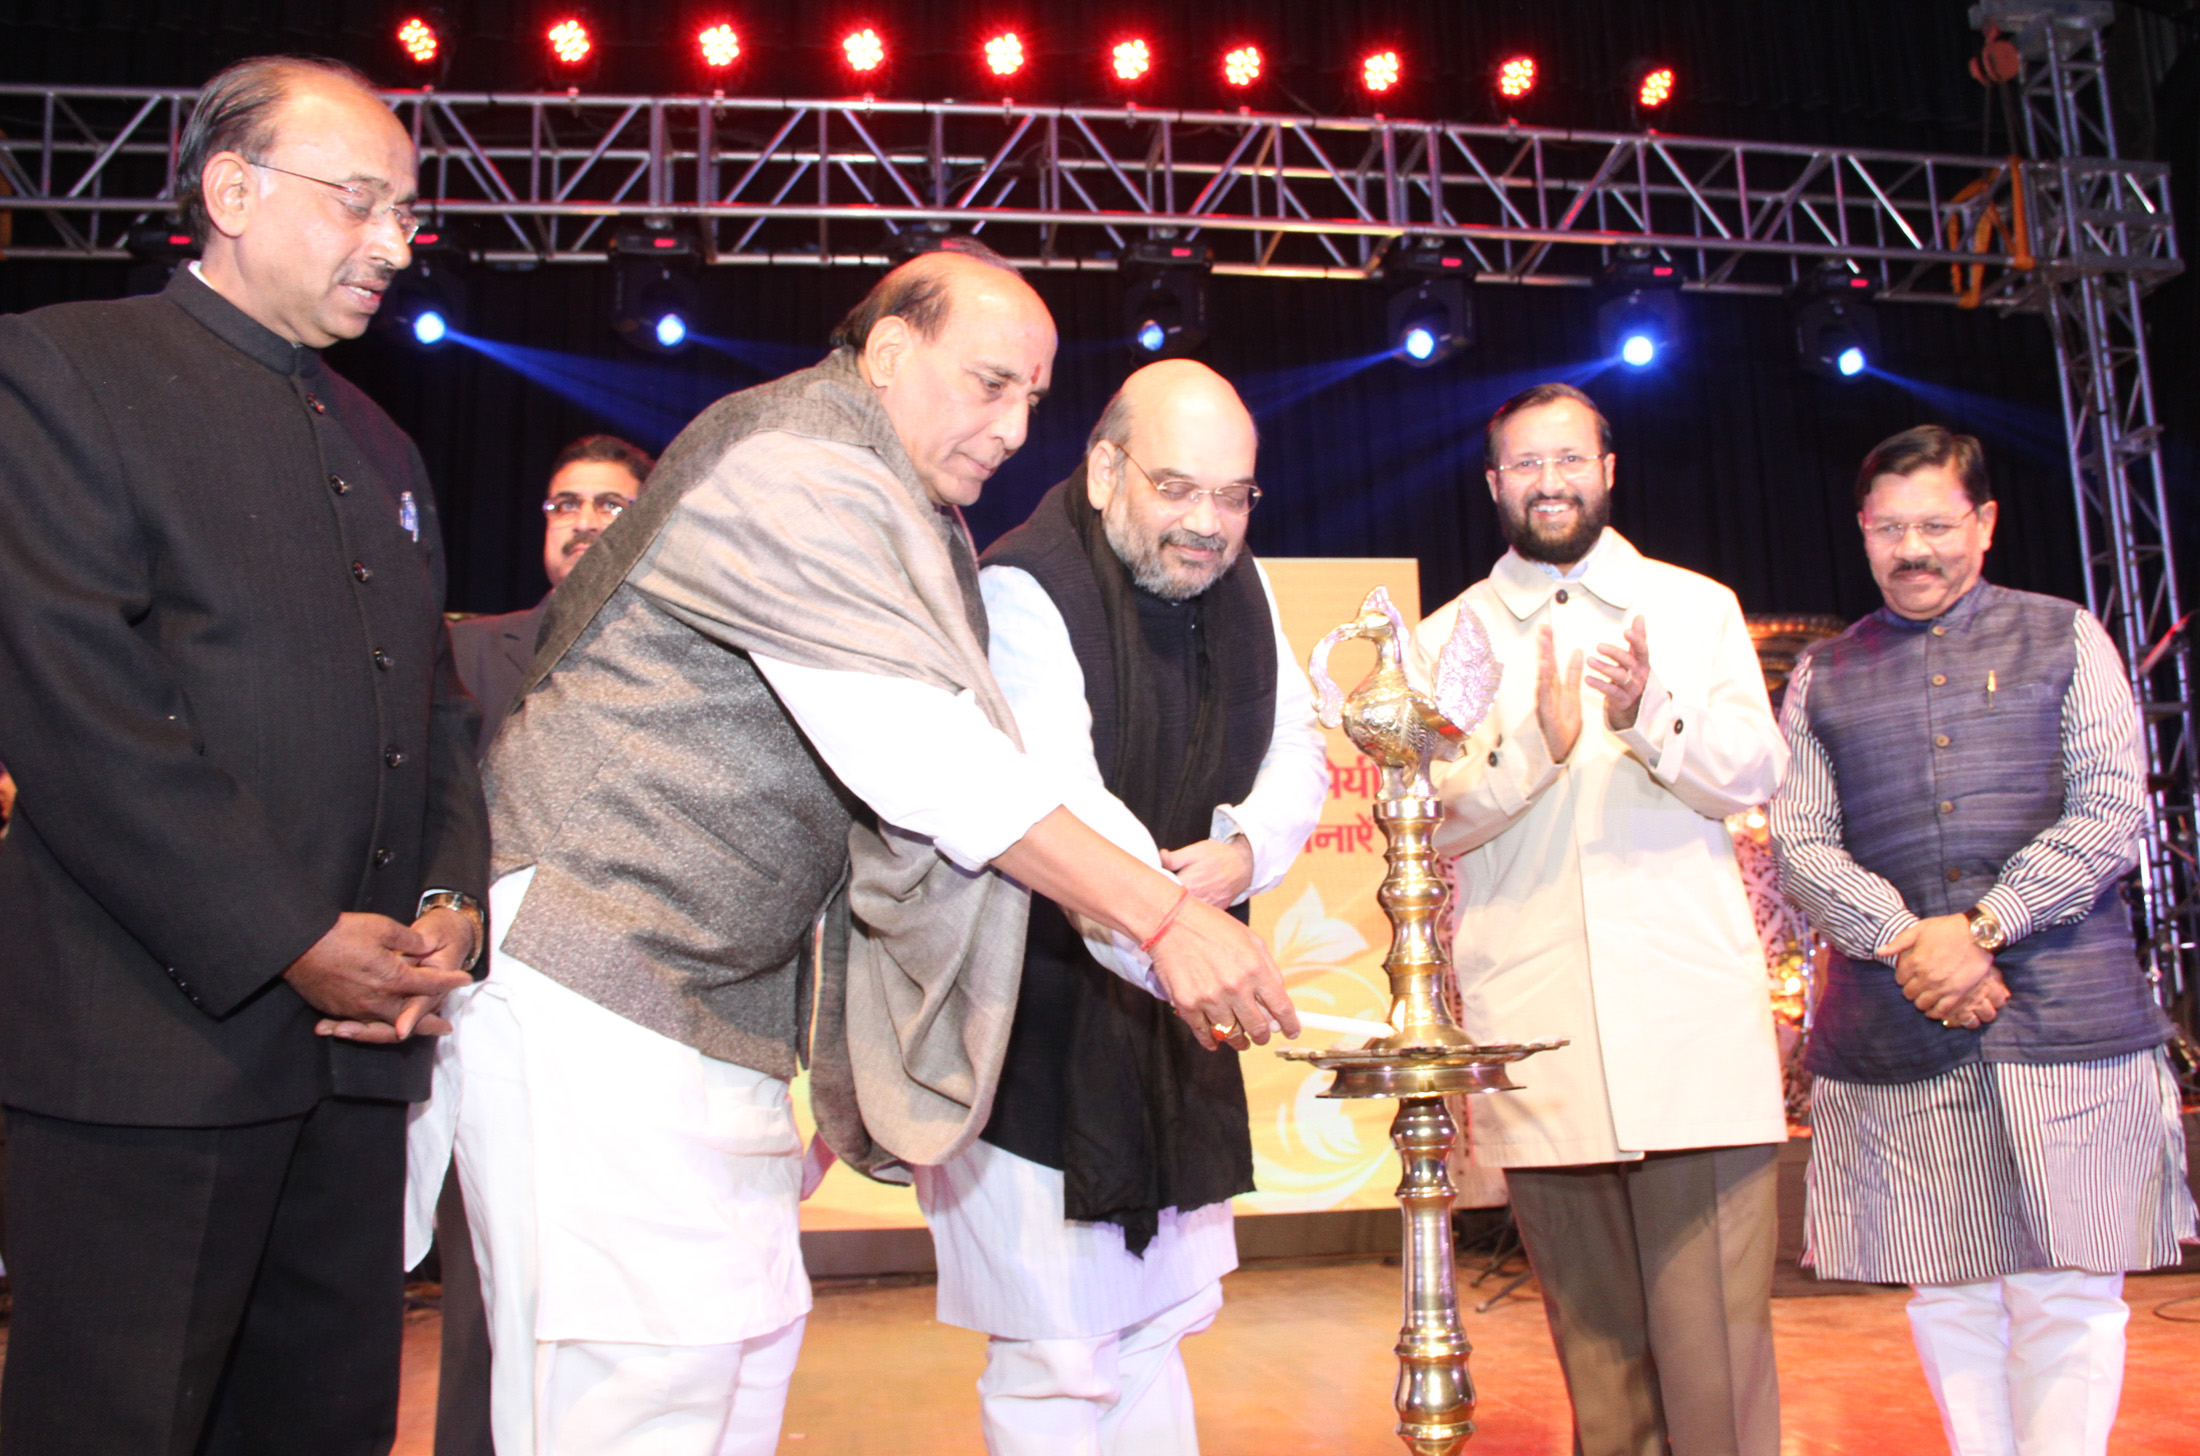 The Union Home Minister, Shri Rajnath Singh lighting the lamp on the occasion of the 91st Birthday celebration of the former Prime Minister, Shri Atal Bihari Vajpayee, in New Delhi on December 25, 2015. 	The Minister of State for Environment, Forest and Climate Change (Independent Charge), Shri Prakash Javadekar and other dignitaries are also seen.